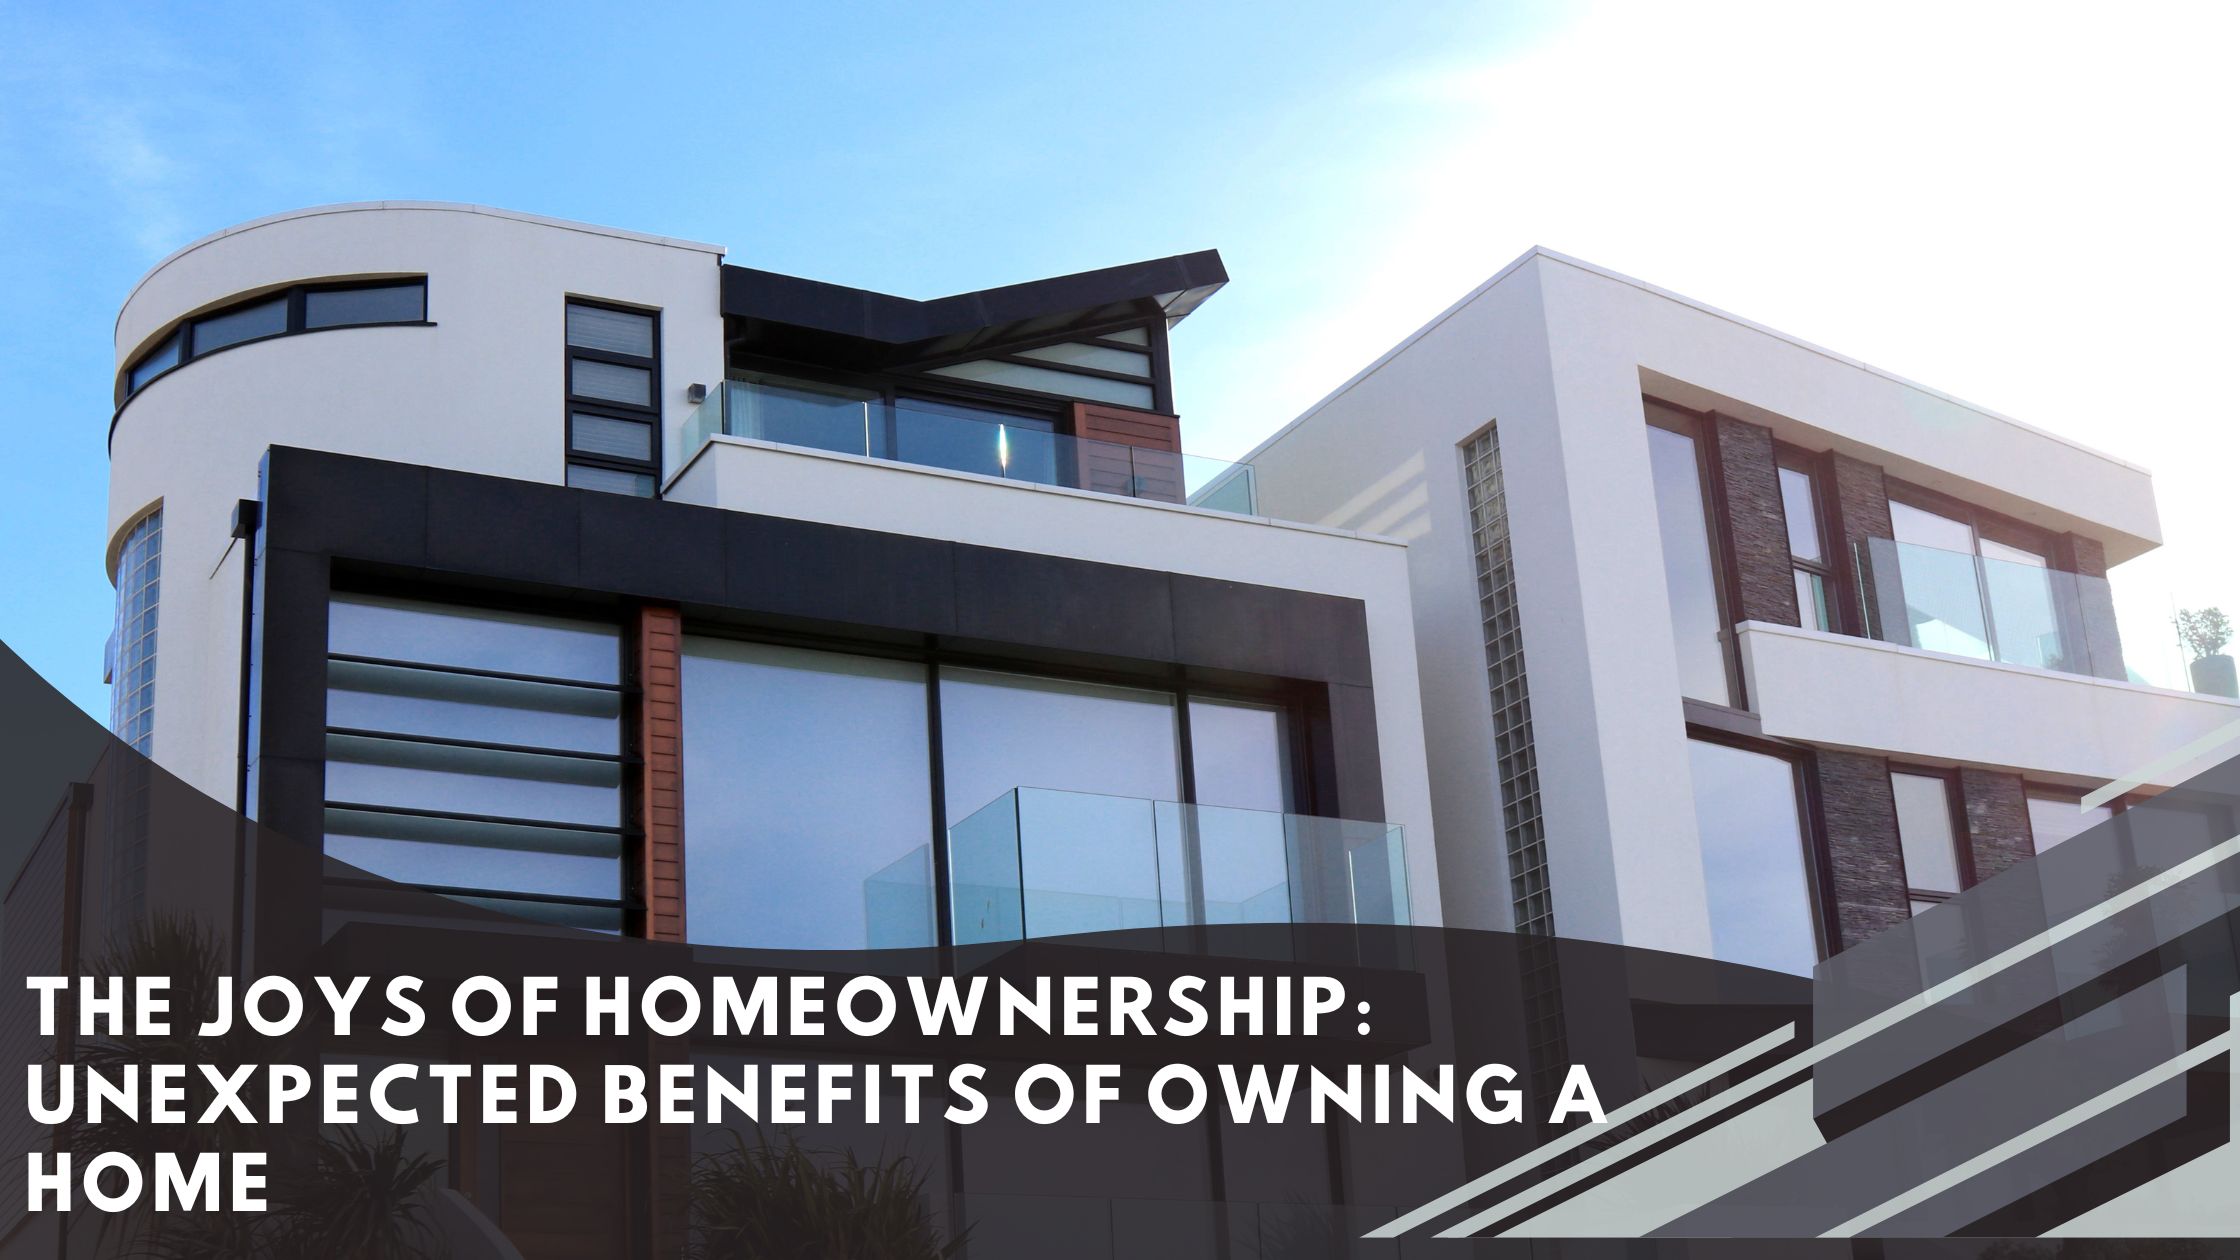 The Joys of Homeownership: Unexpected Benefits of Owning a Home